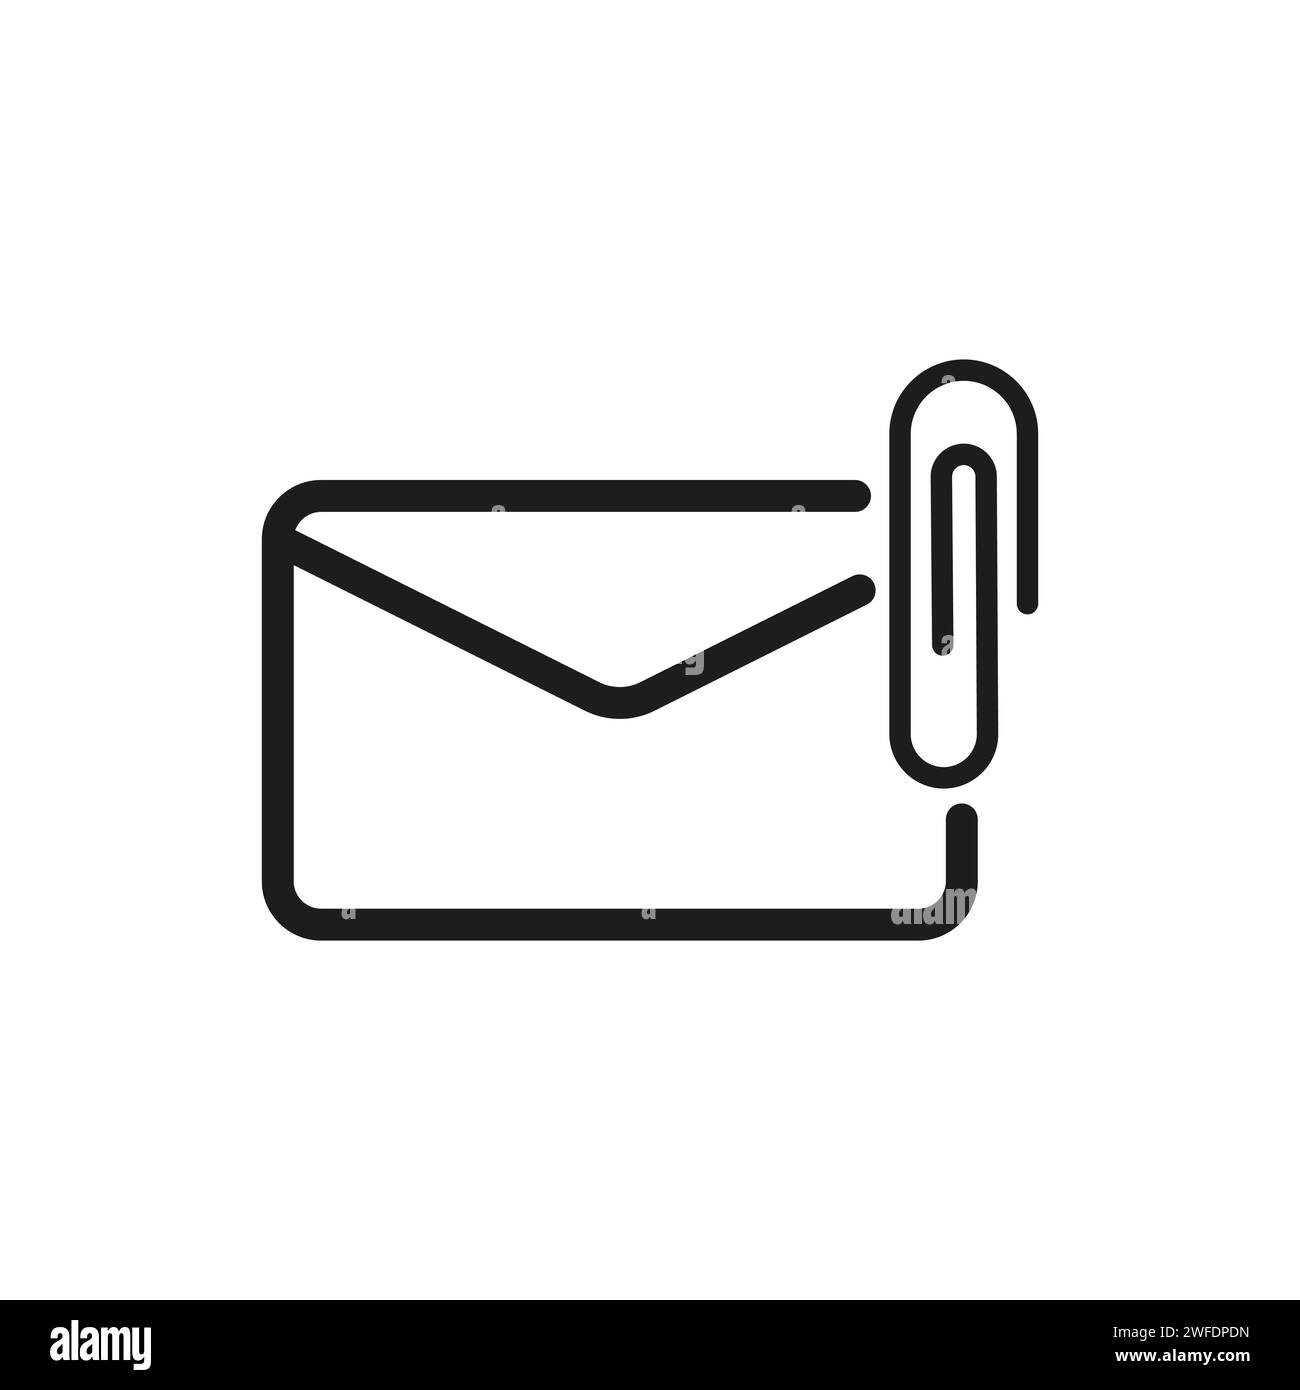 Mail Attachment icon. Vector illustration. EPS 10. Stock image. Stock Vector